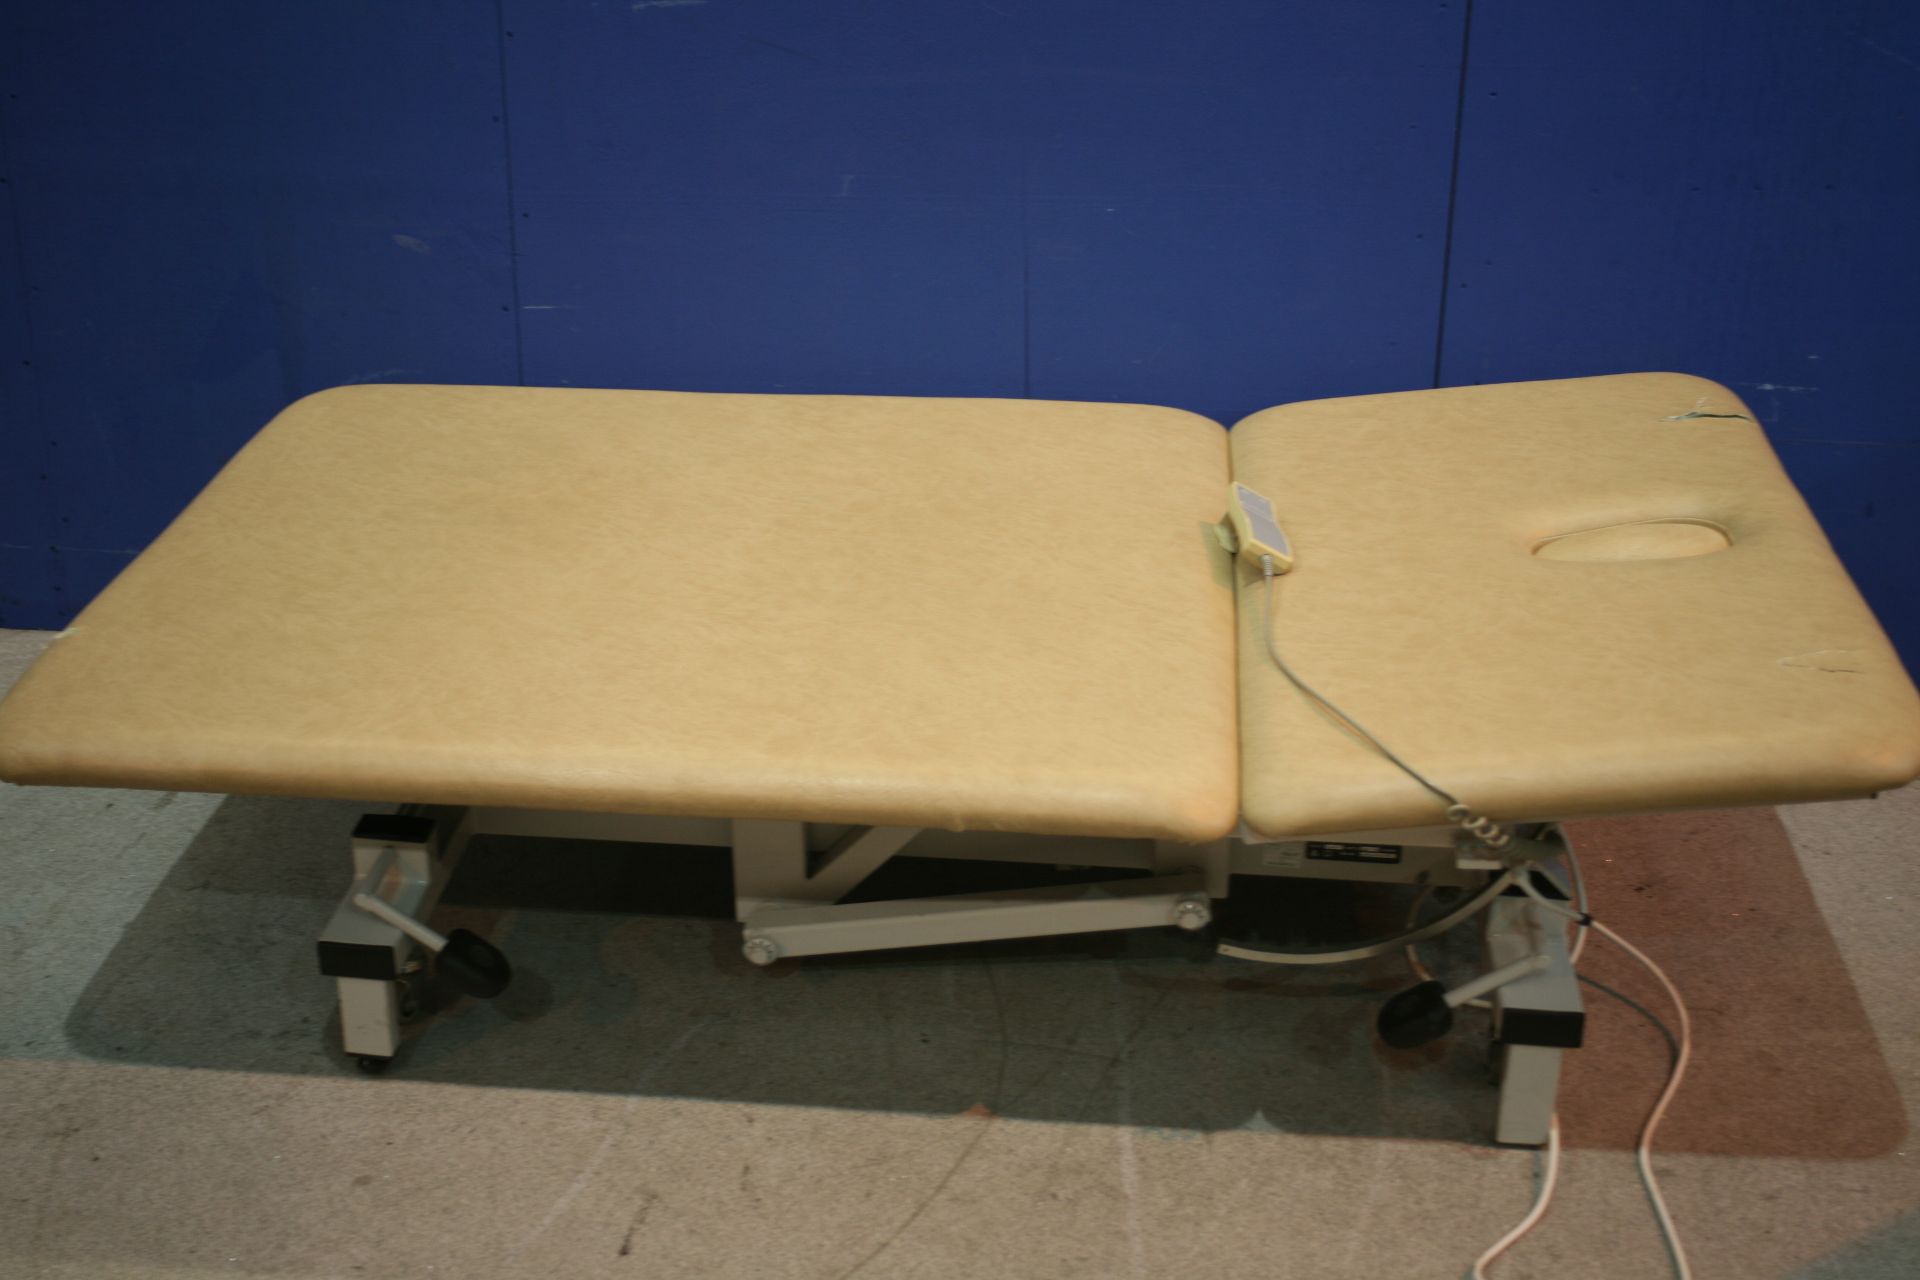 Hydraulic Bariatric Patient Couch *Tears In Upholstery*